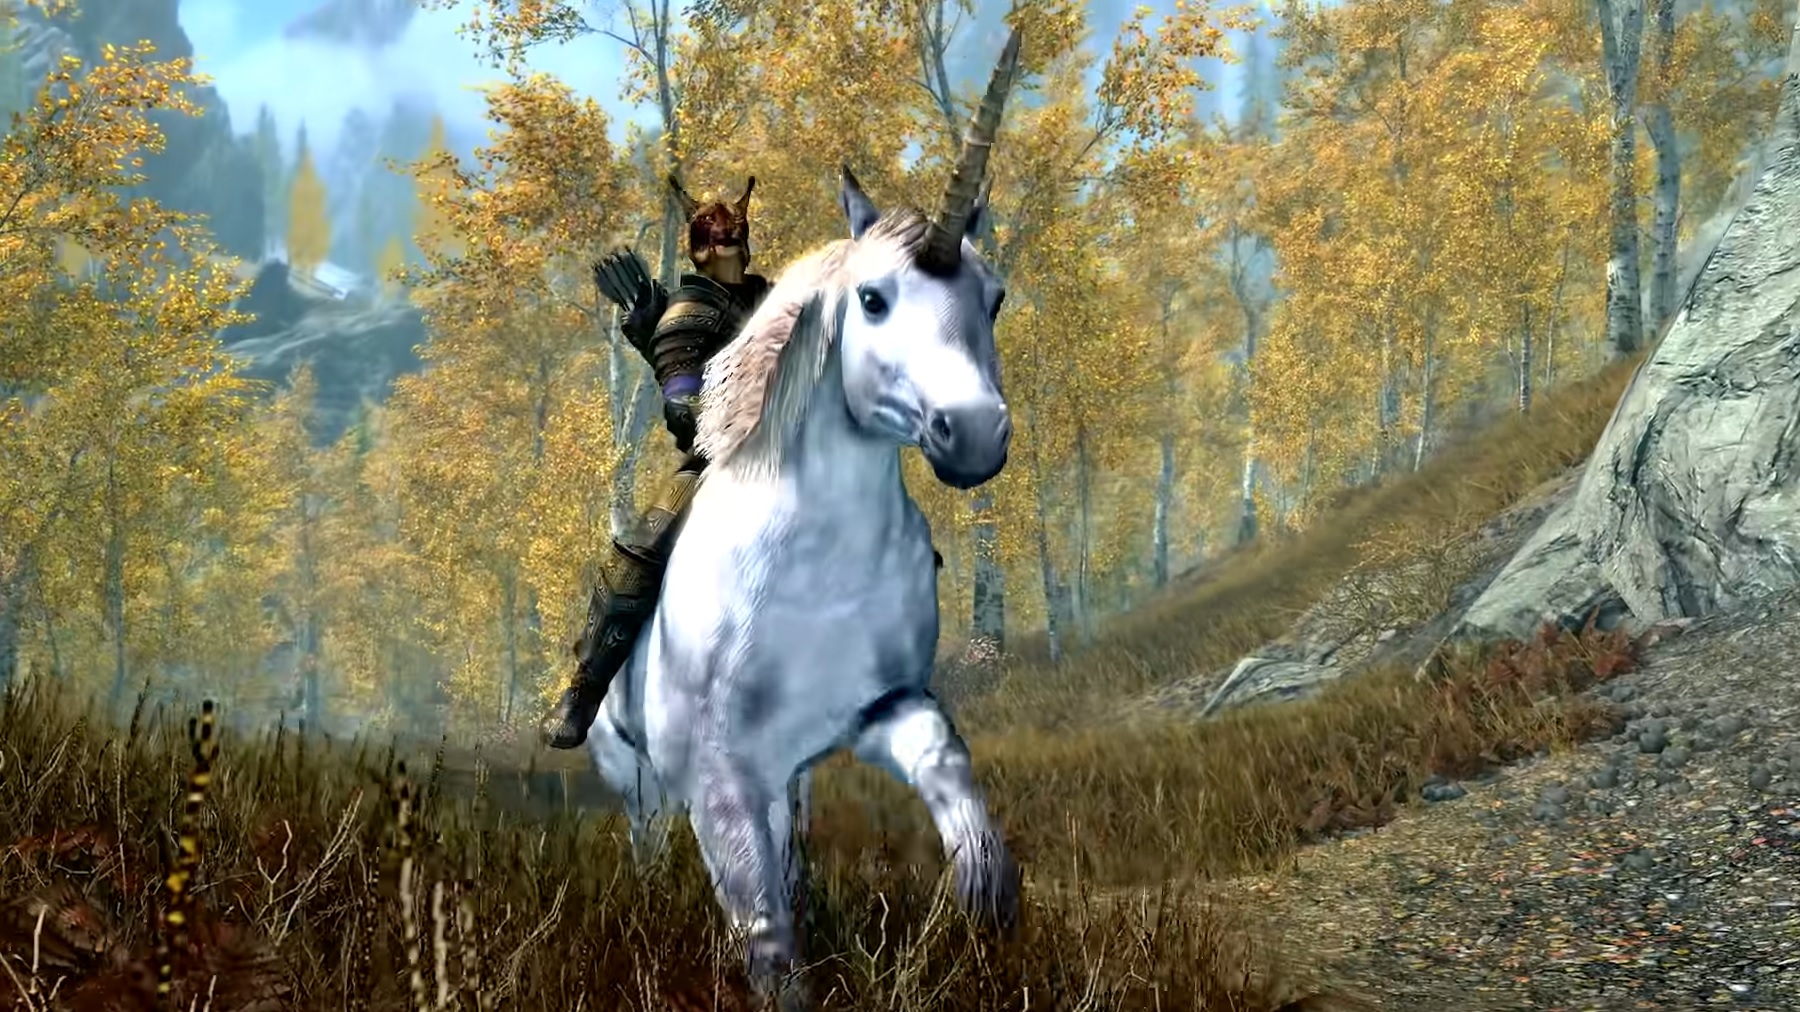  Skyrim Anniversary Edition is causing crashes by running too efficiently 